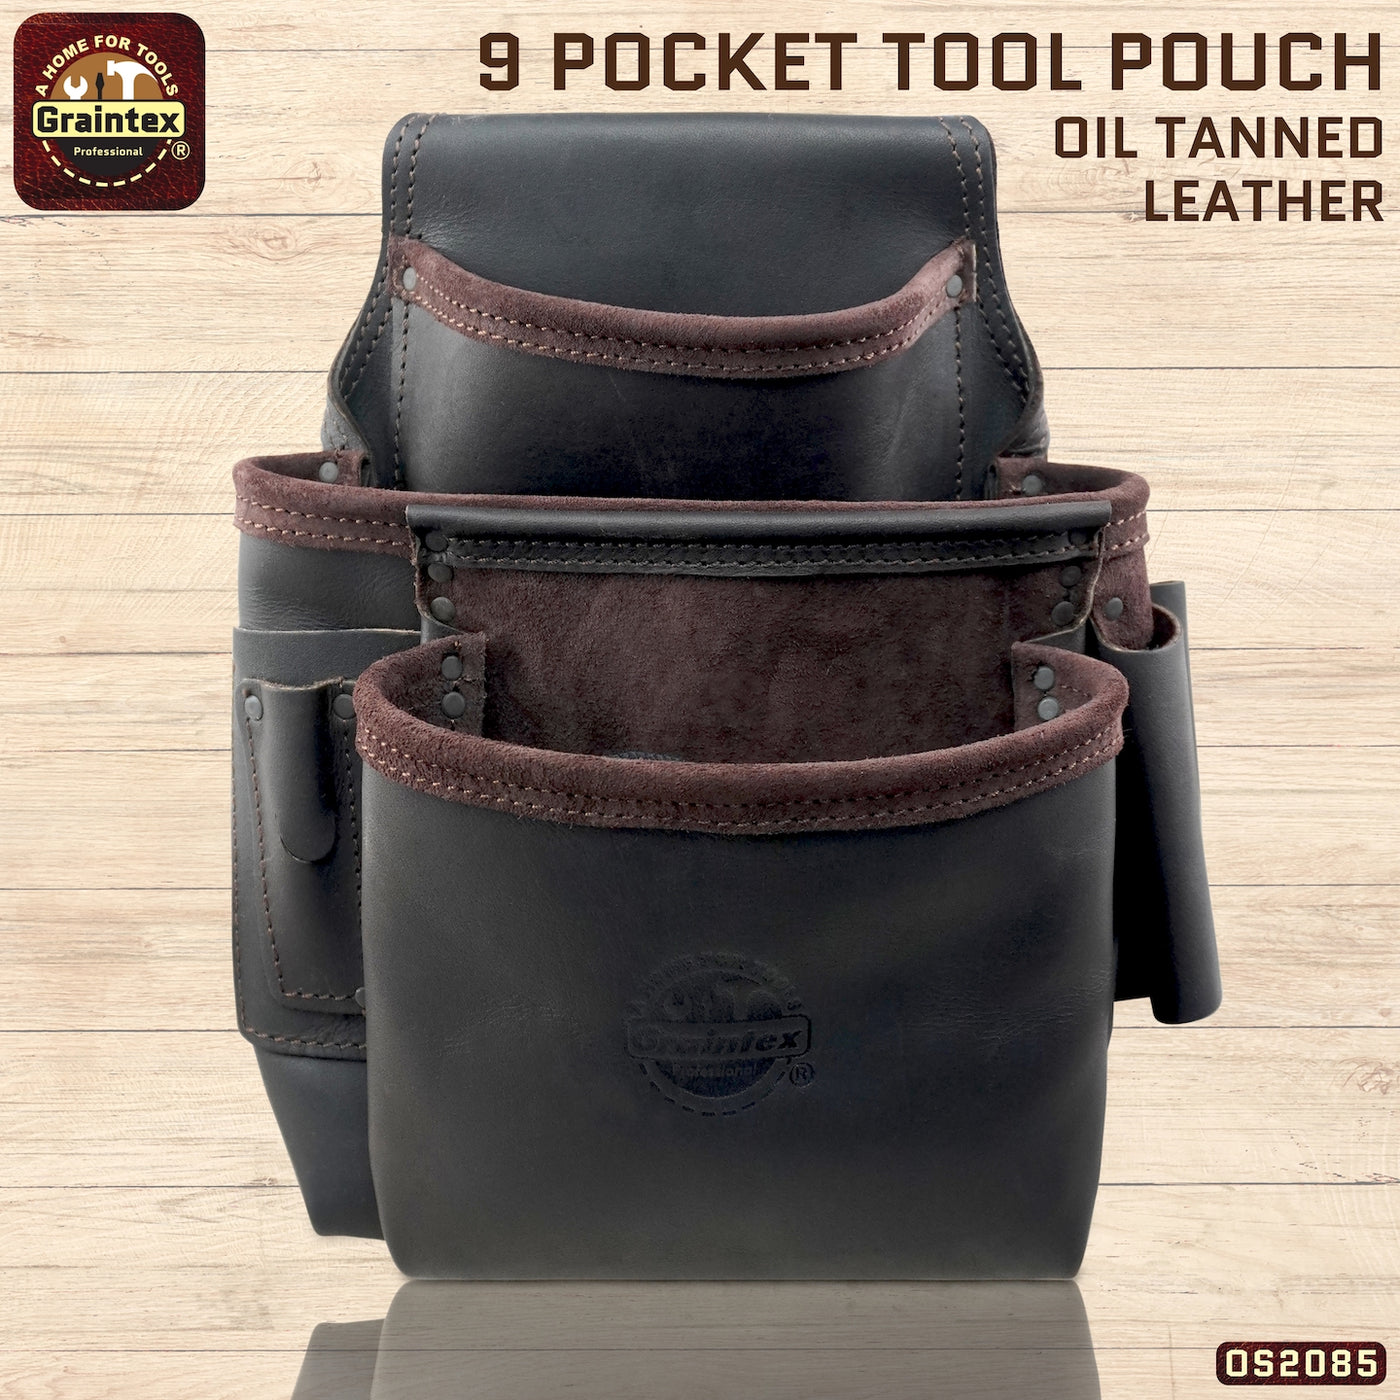 OS2085 :: 9 Pocket Framer’s Nails & Tools Pouch Brown Color Top Grain Oil Tanned Leather